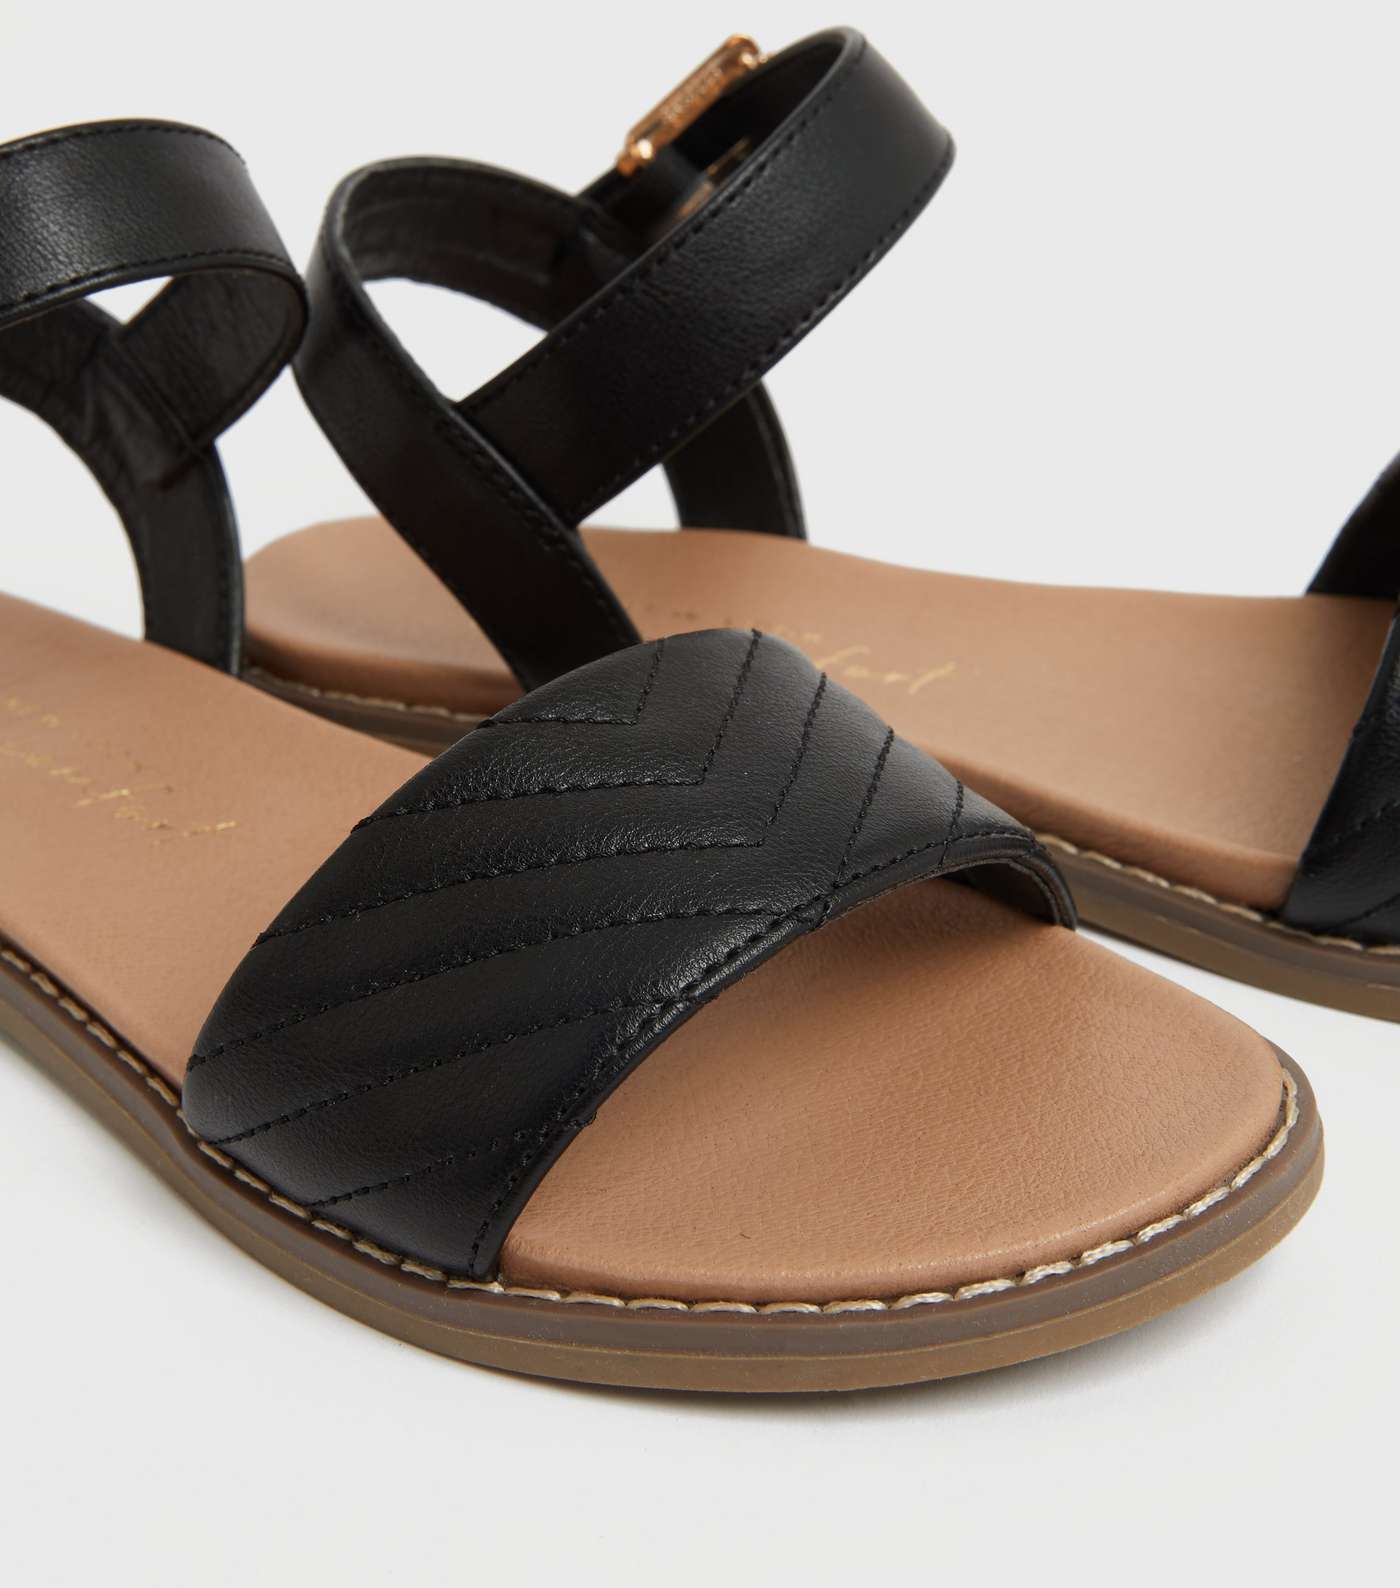 Black Quilted Open Toe Sandals Image 4